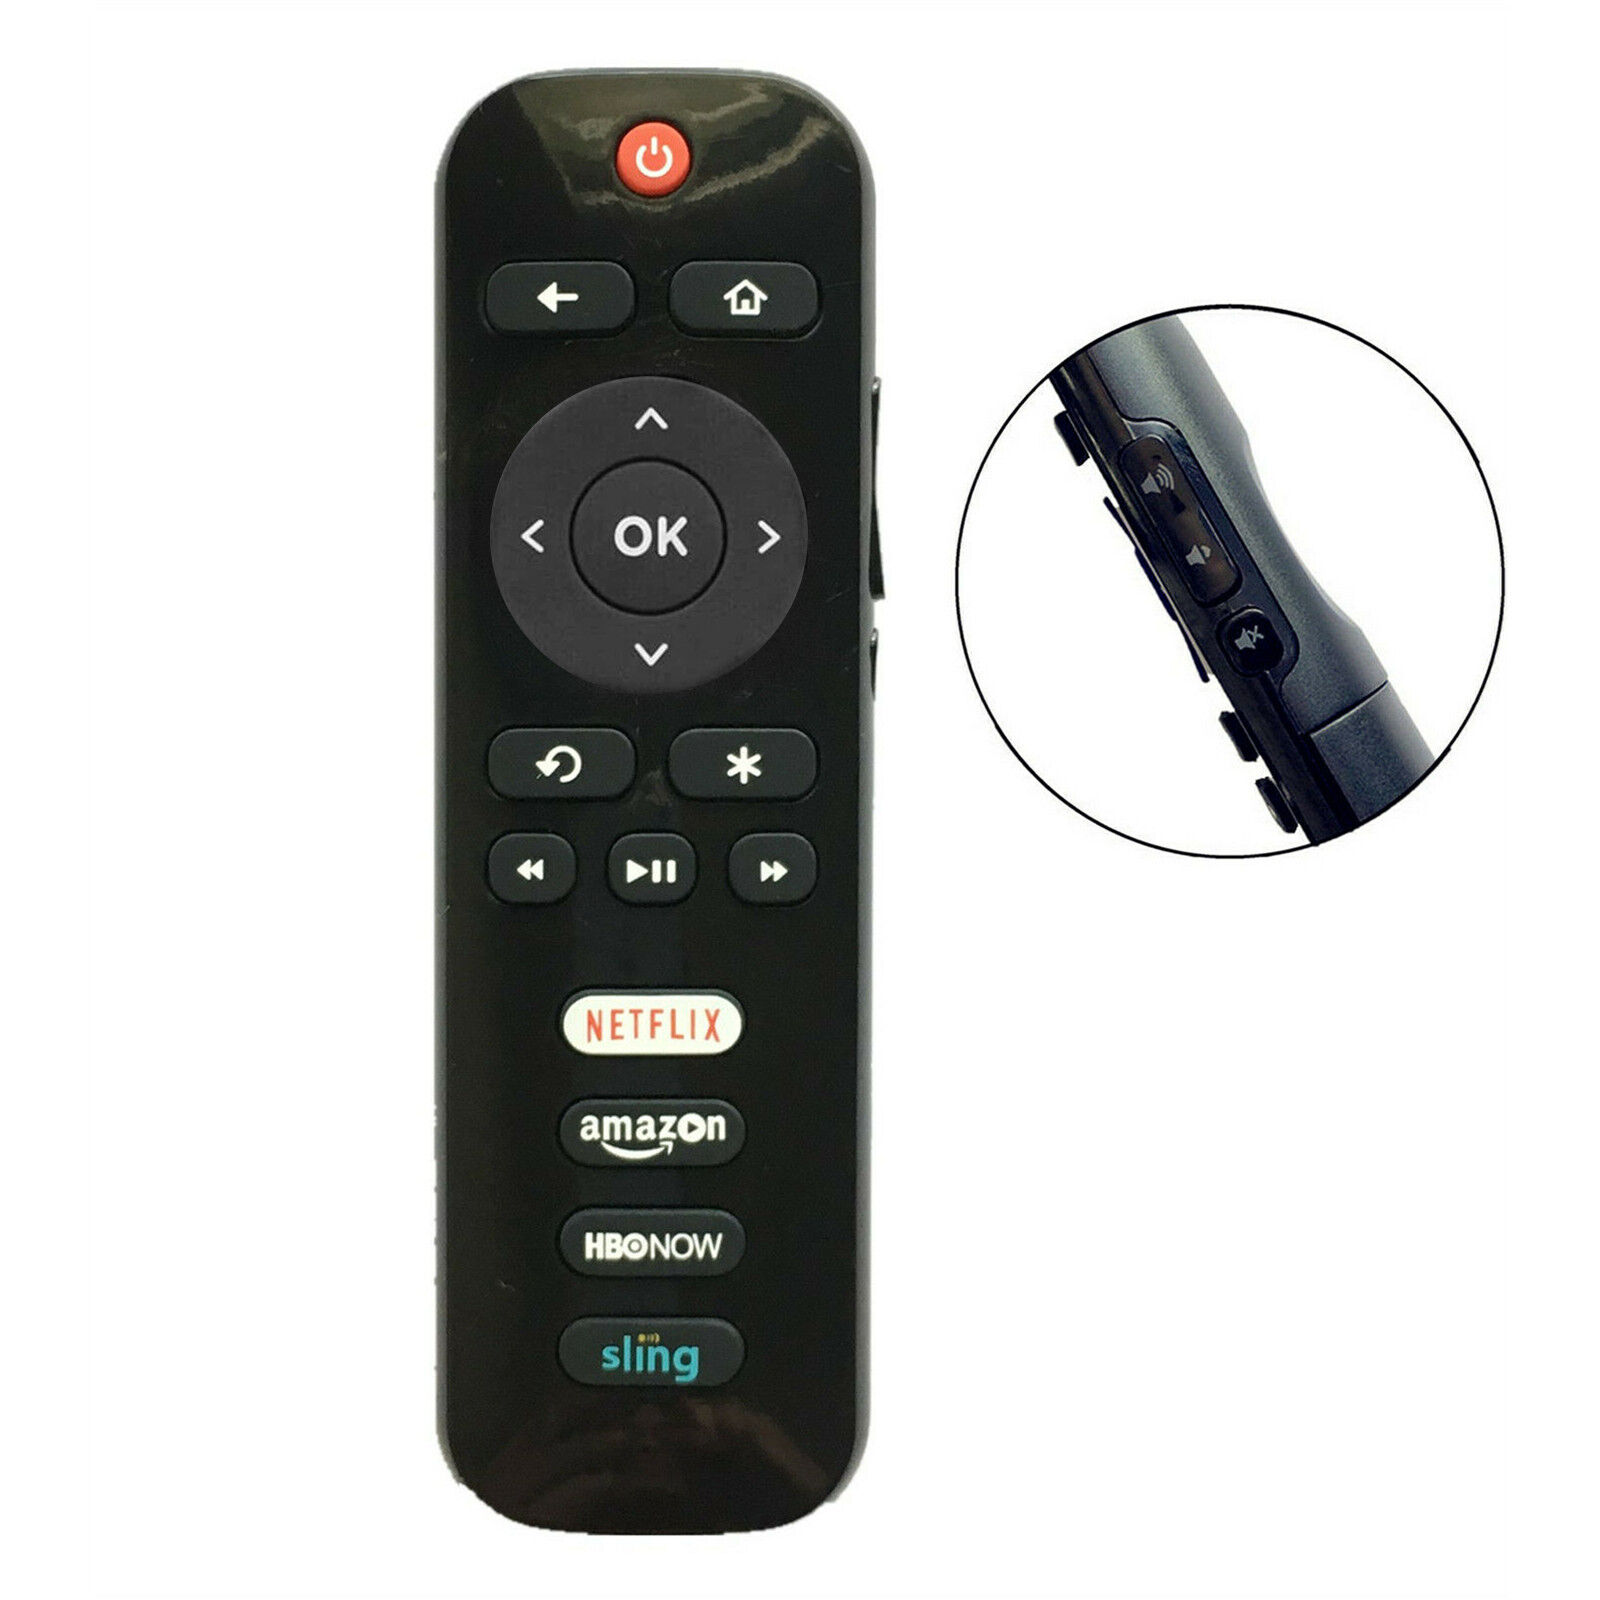 New RC280 LED HDTV Remote for TCL ROKU TV with HBONOW Sling Netflix Amazon